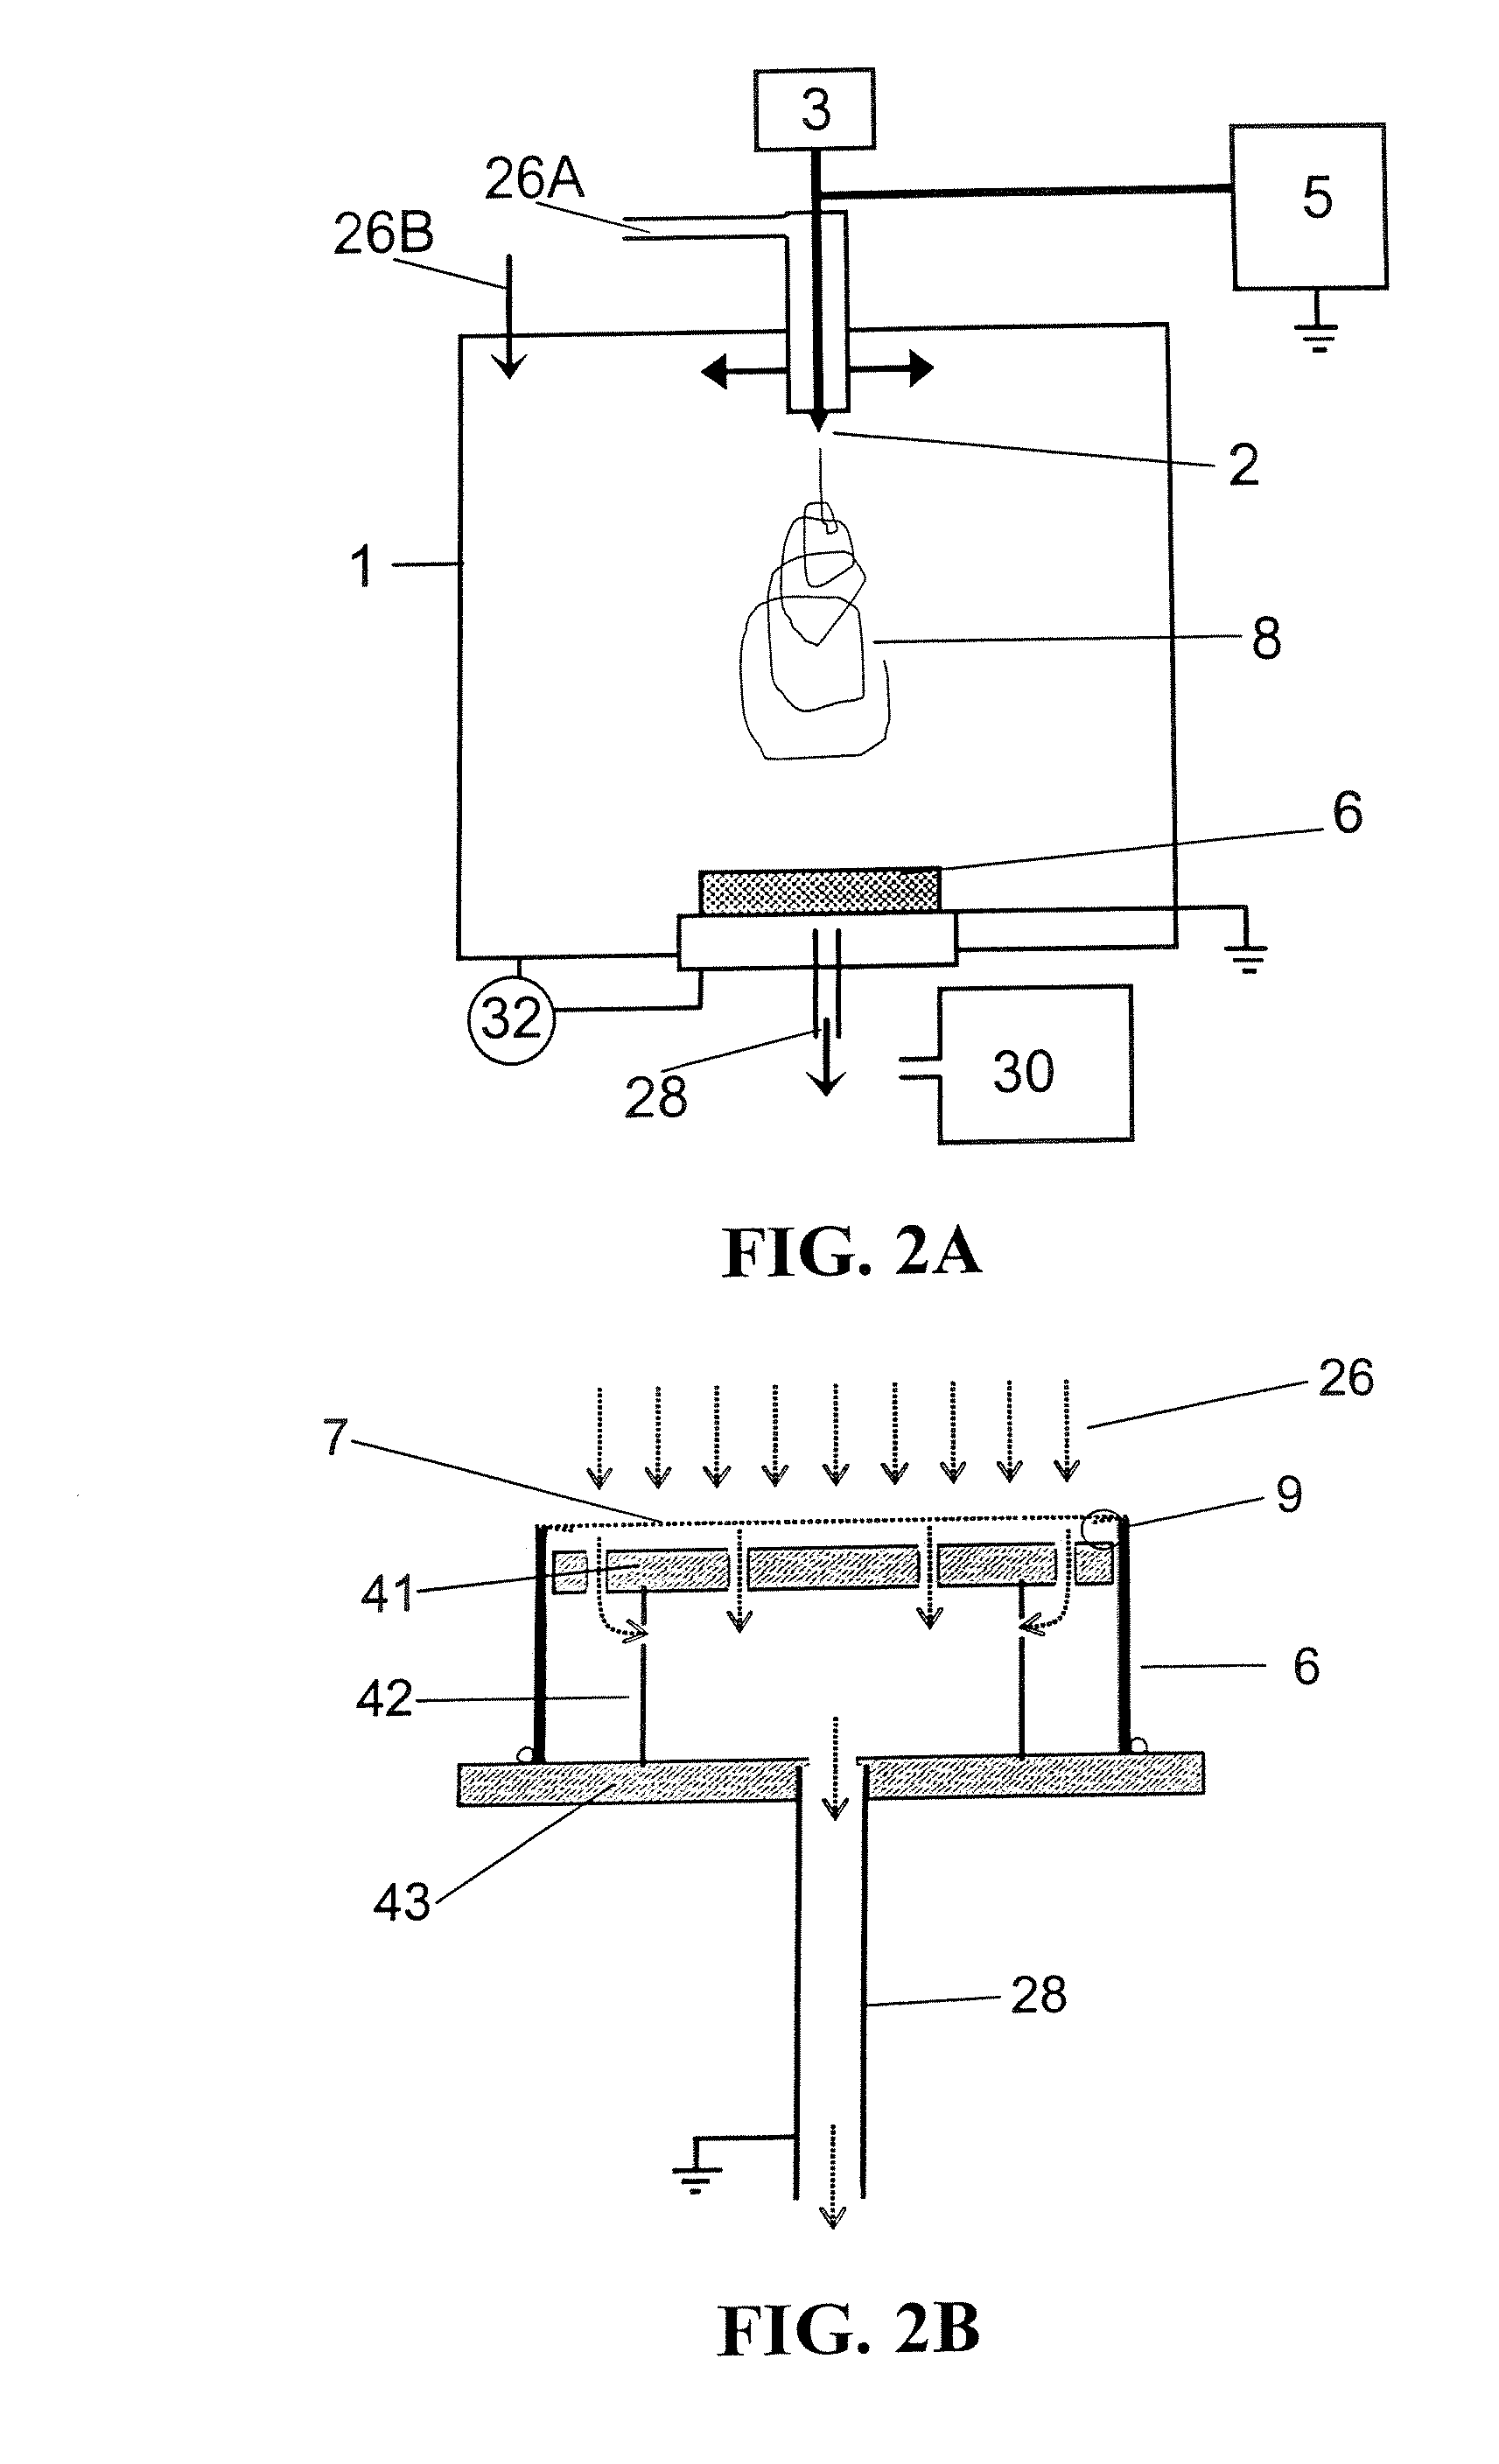 Particle filter system incorporating nanofibers